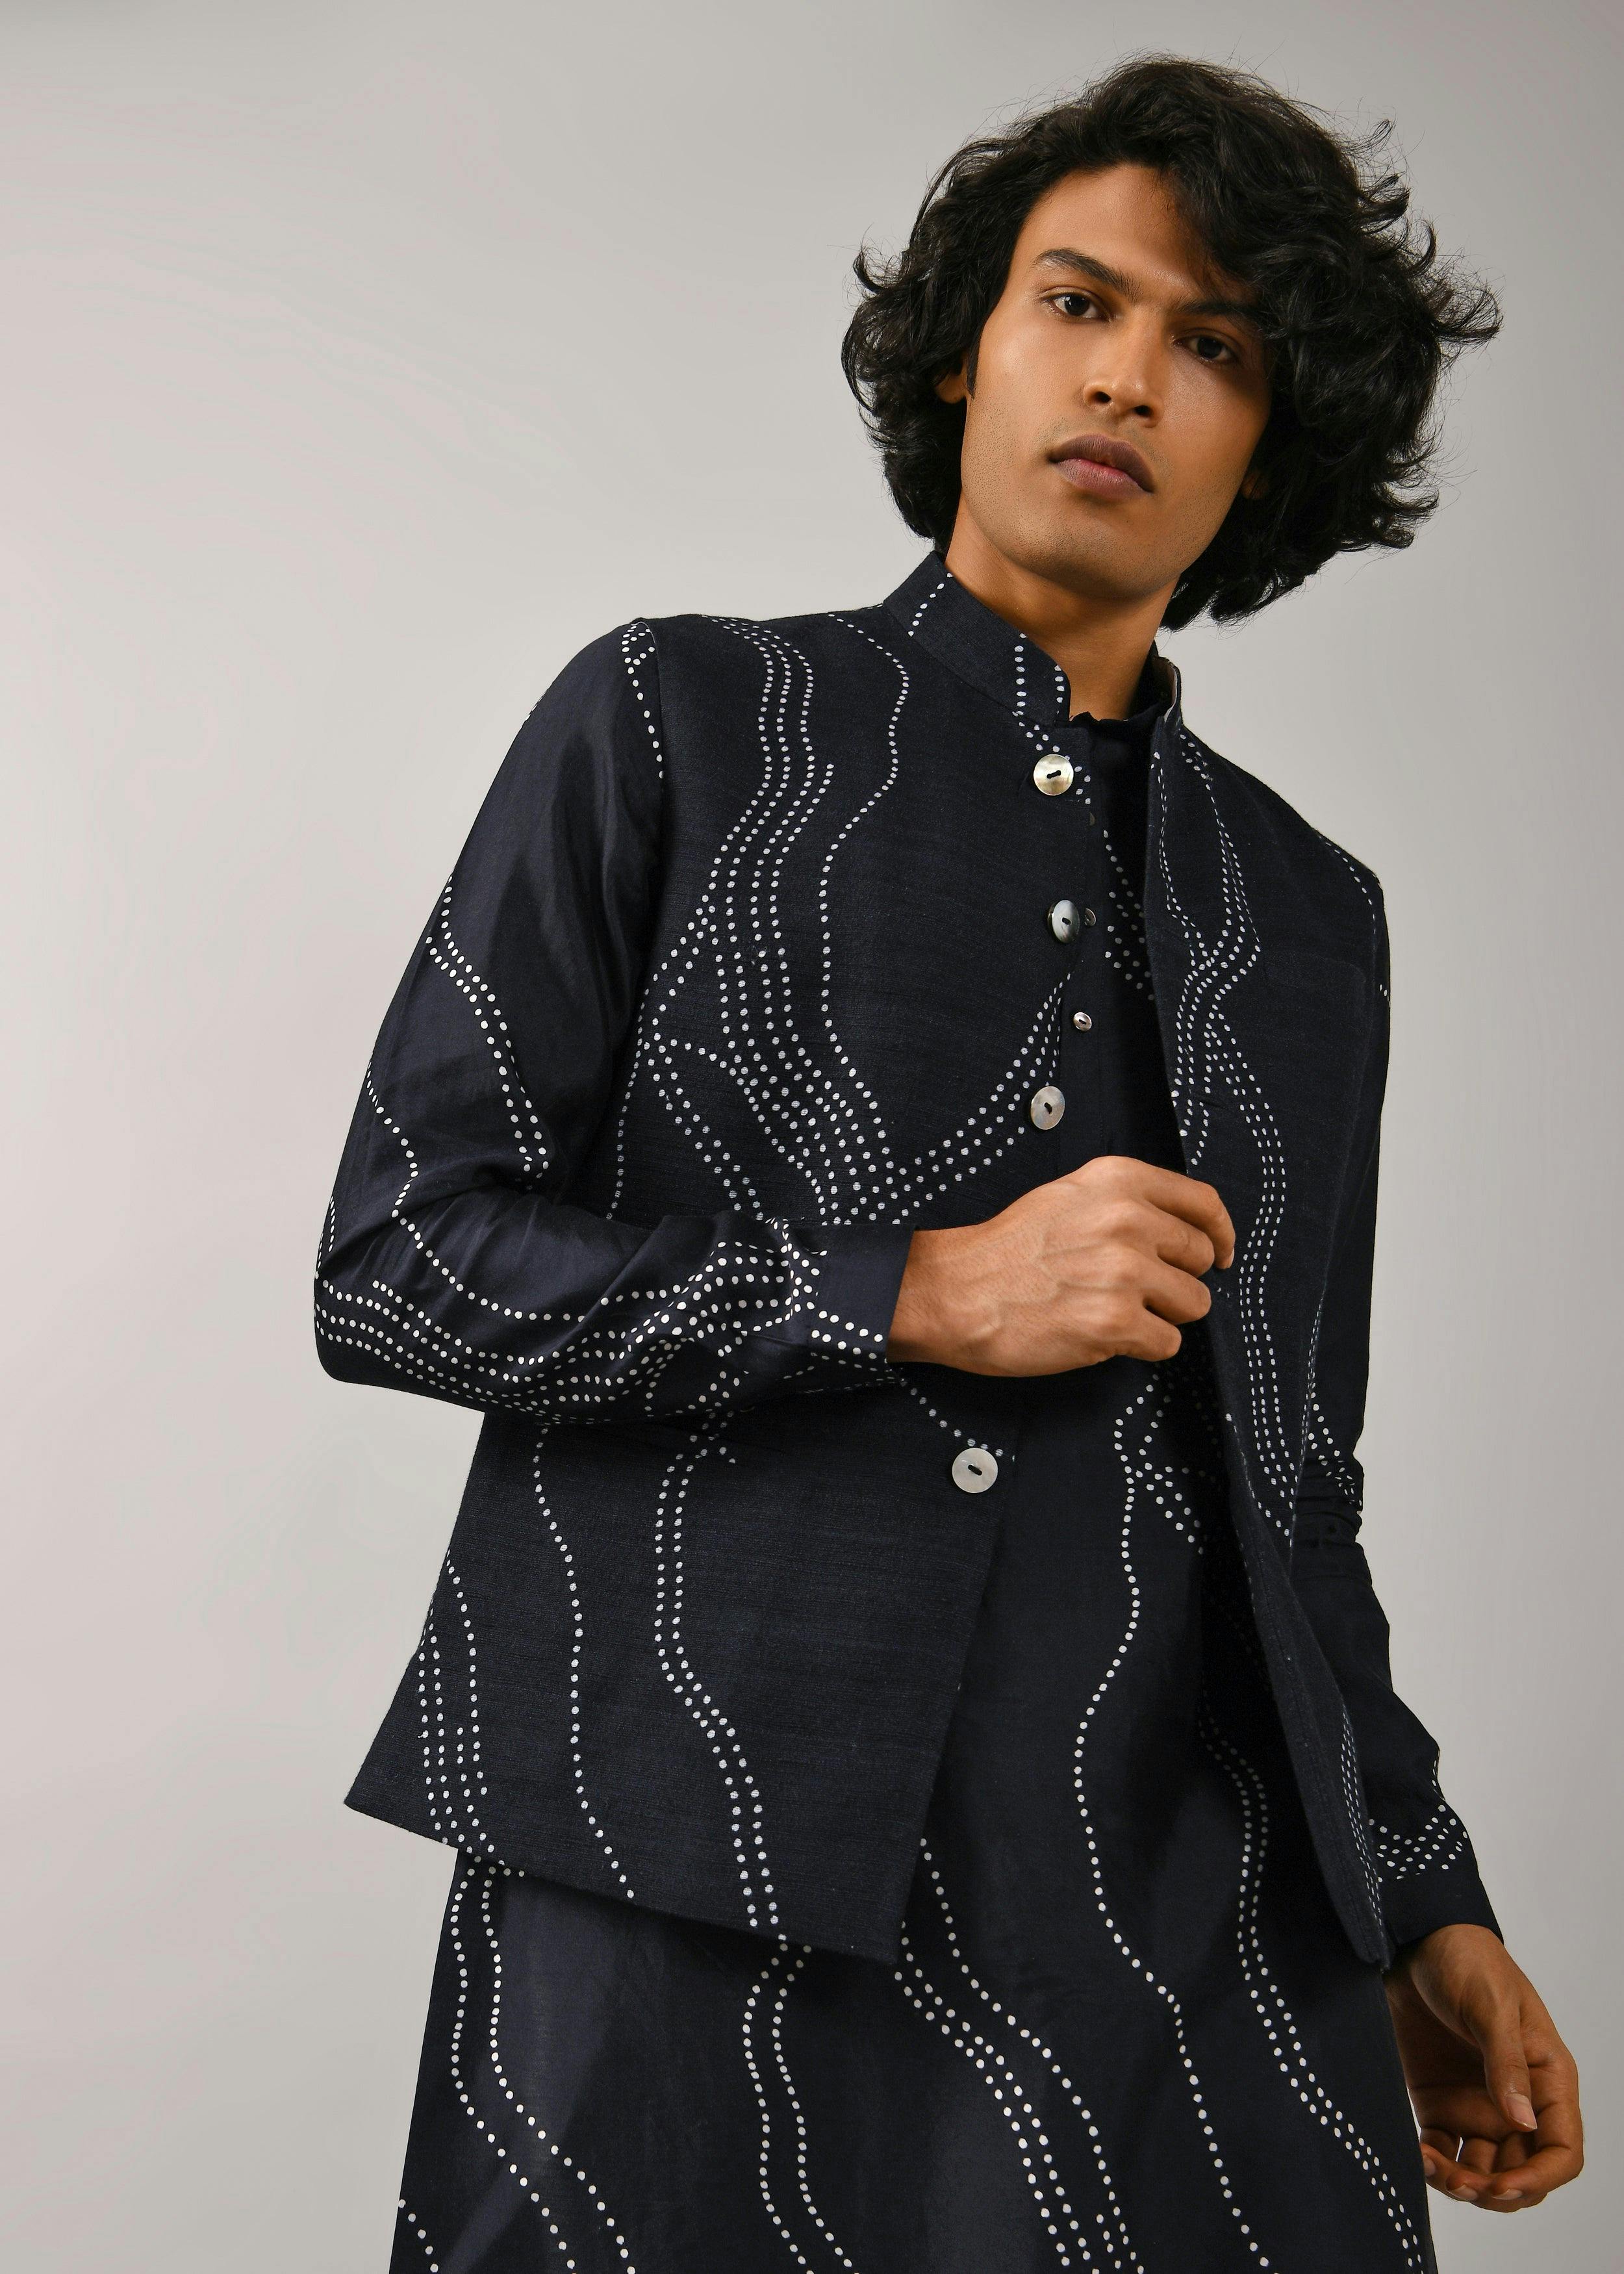 Constellation Printed Bundi, a product by Country Made